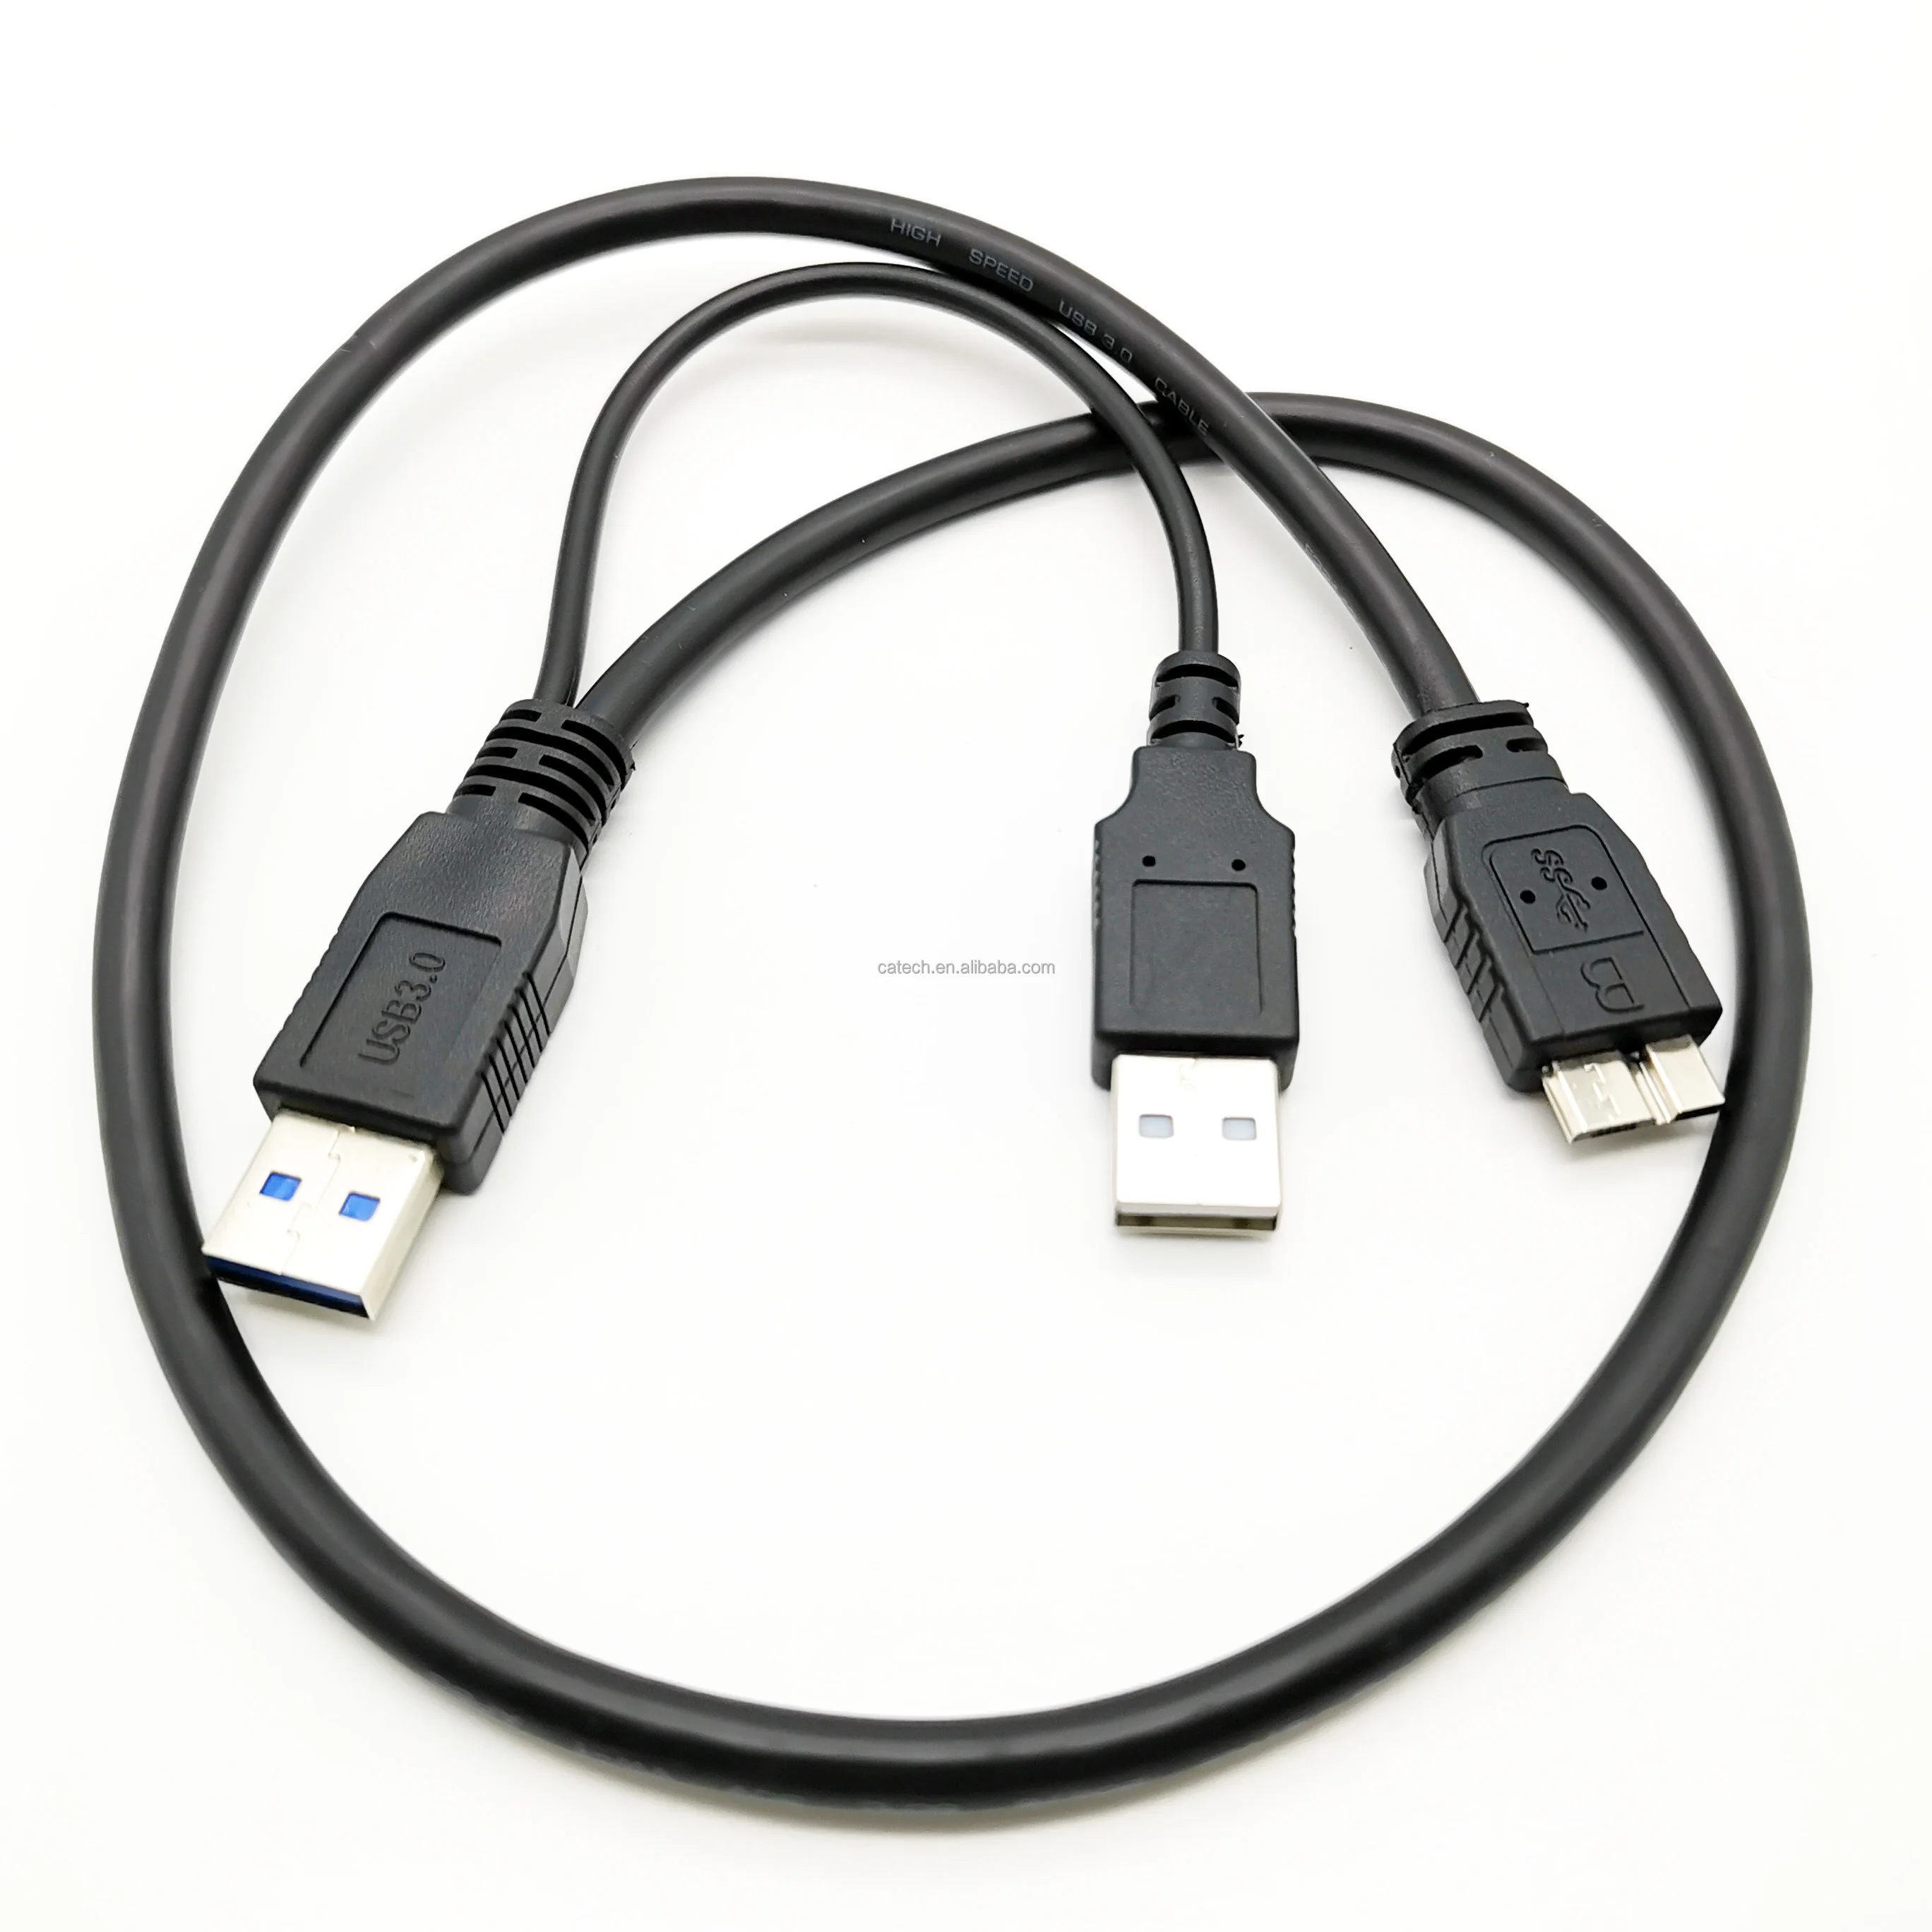 æggelederne Ære vores Usb 3.0 Type A To Micro-b Usb Y Shape High Speed Cable For External Hard  Drive - Buy Usb3.0 Cable,Usb3.0 Portable Hard Disk Cable,Hdd Micro Usb 3.0  Cable Product on Alibaba.com